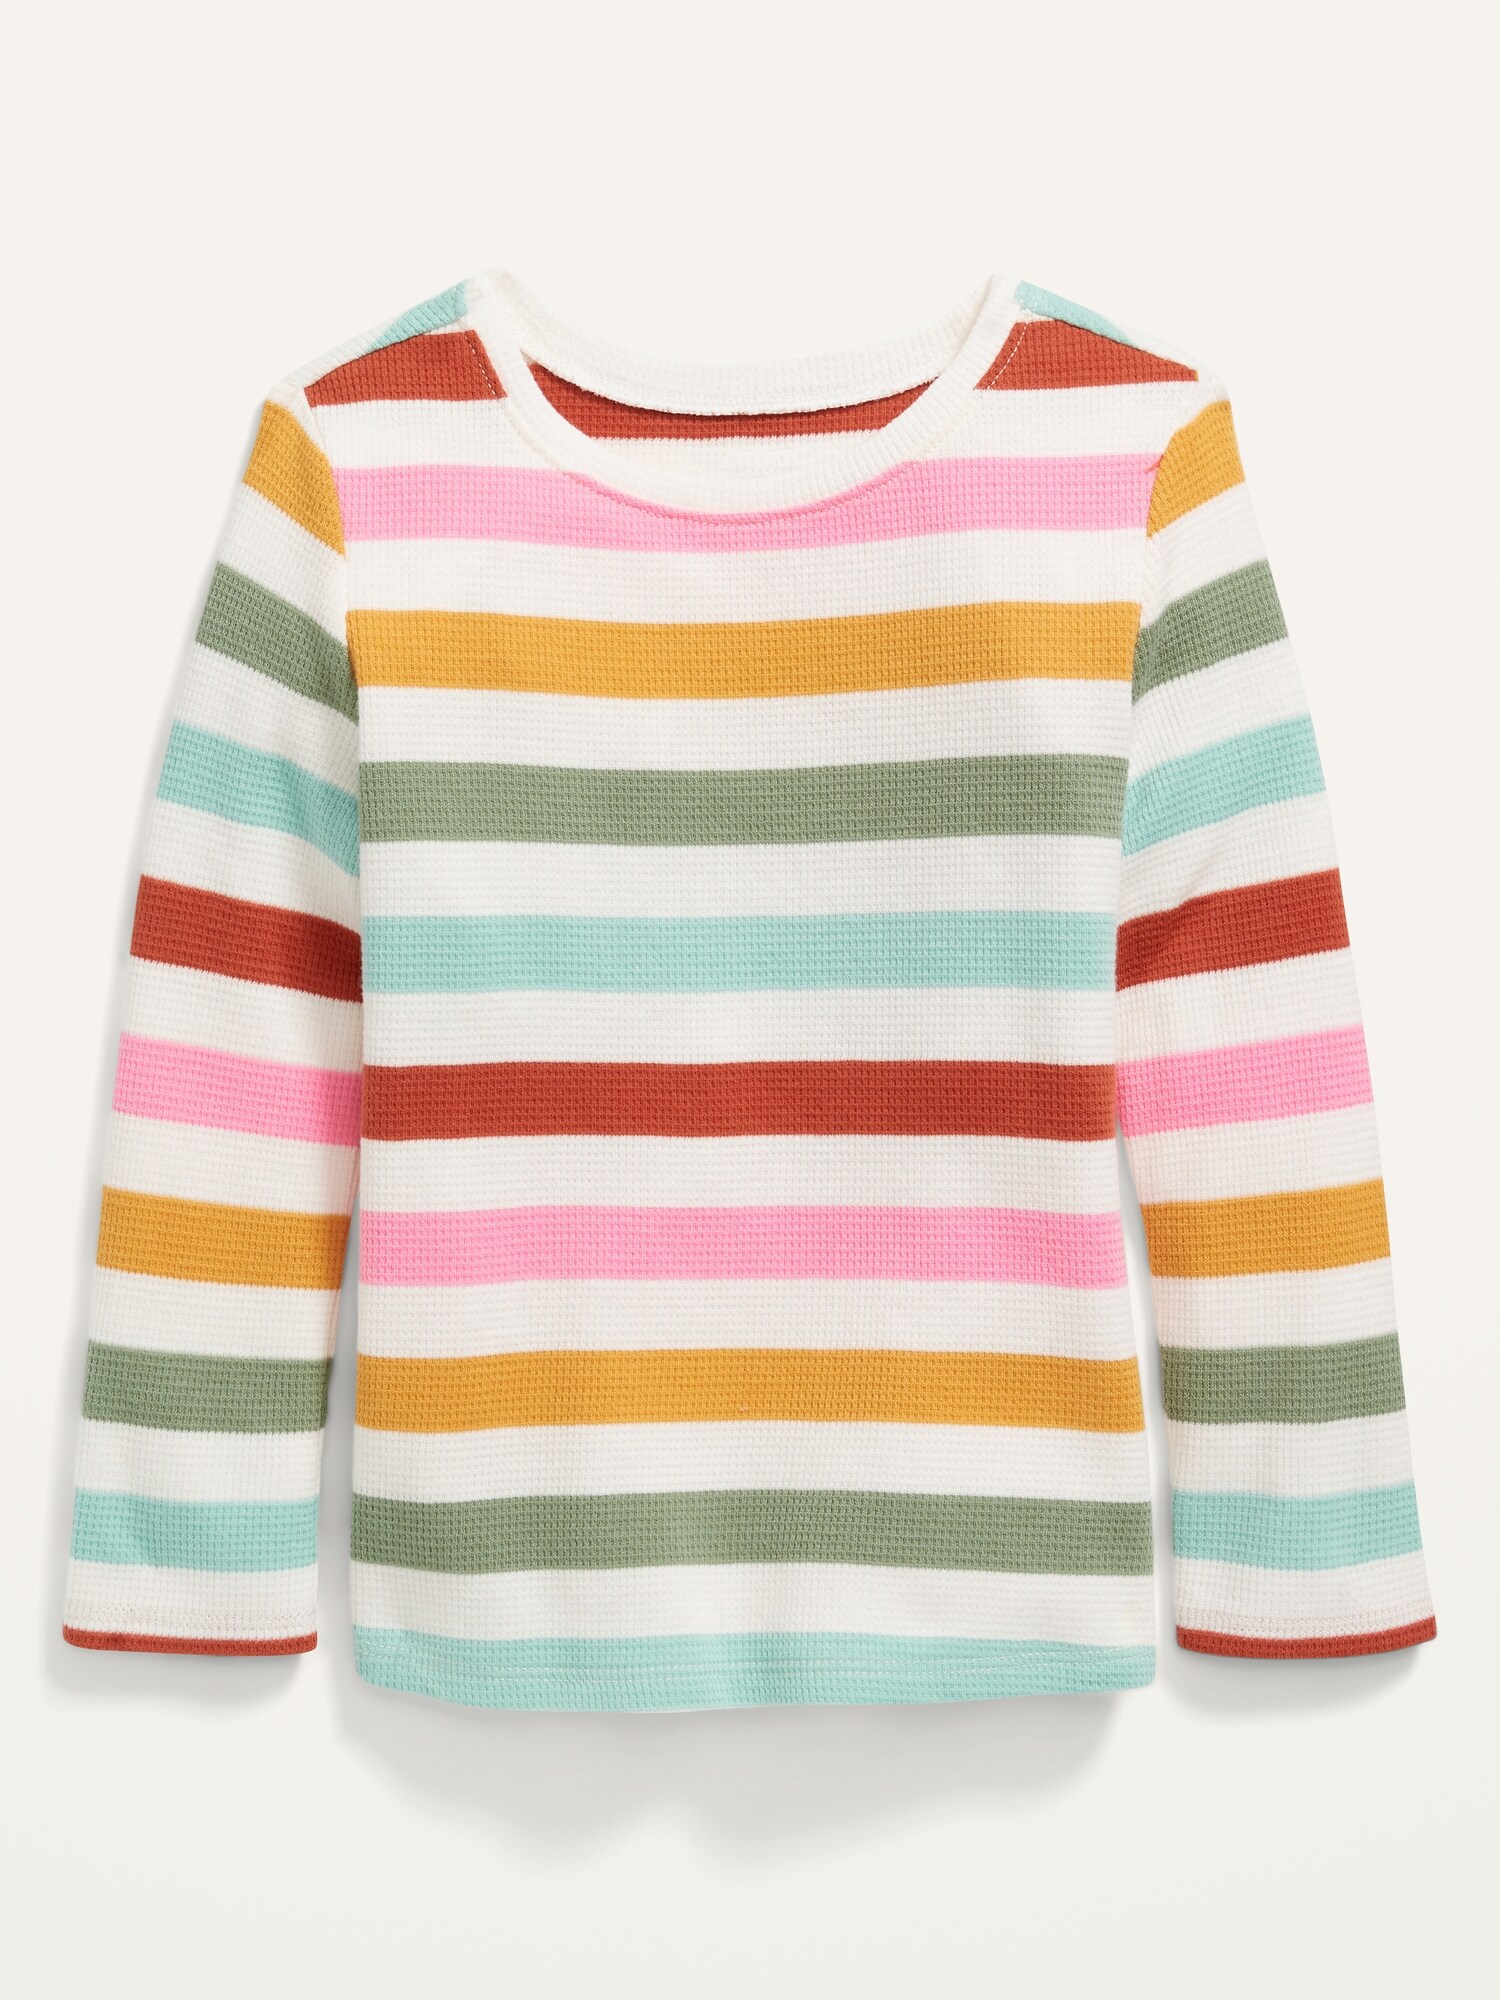 Unisex Long-Sleeve Printed Thermal T-Shirt for Toddler | Old Navy